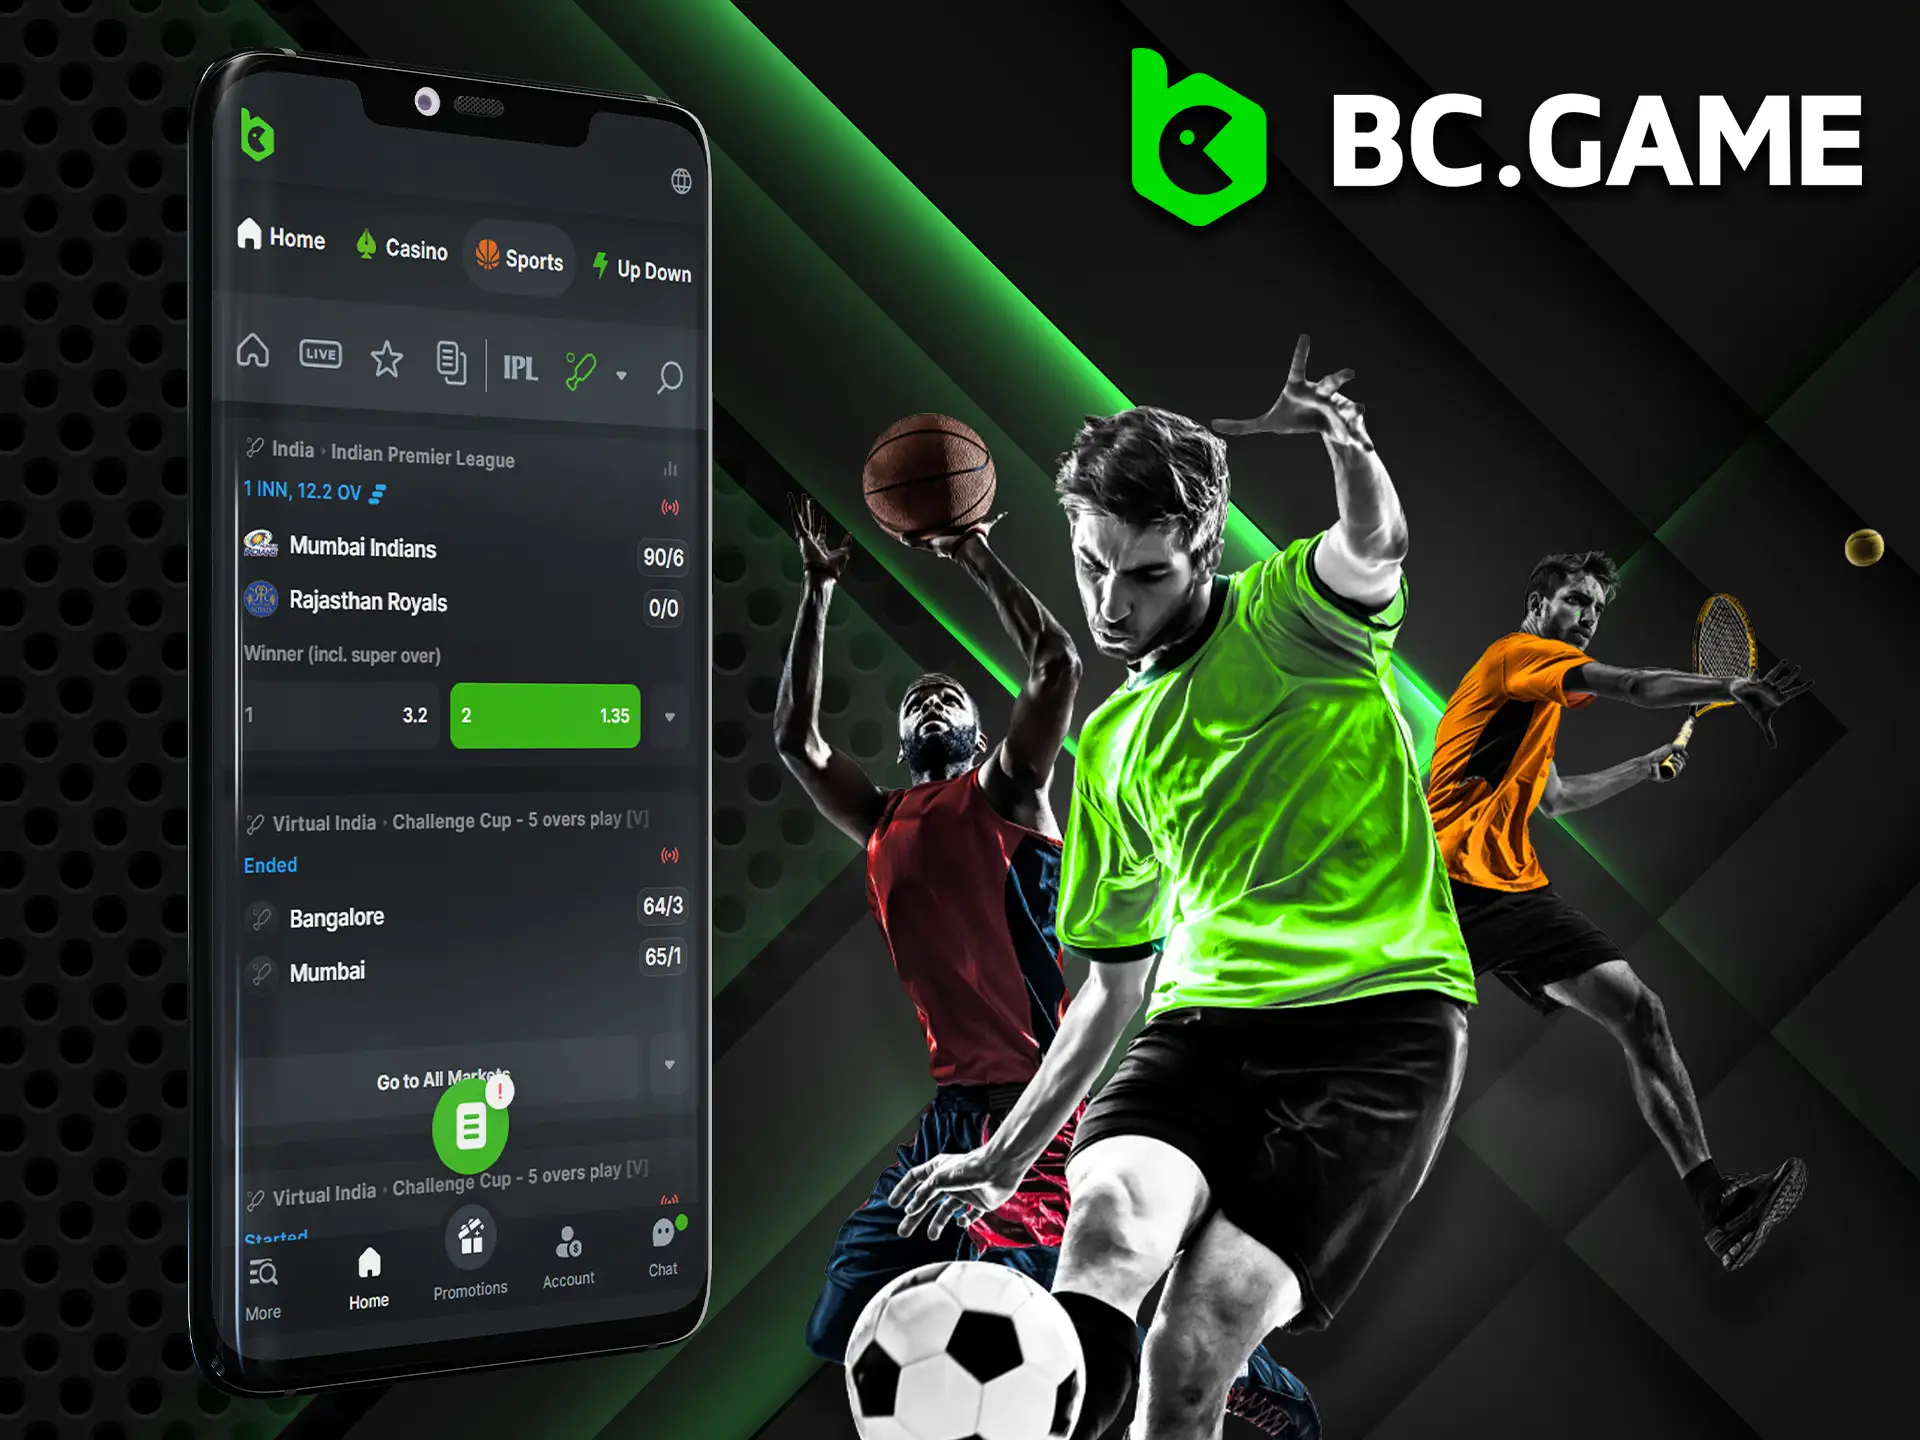 To bet on BC GAME, make a deposit and select a bet on a sports discipline.